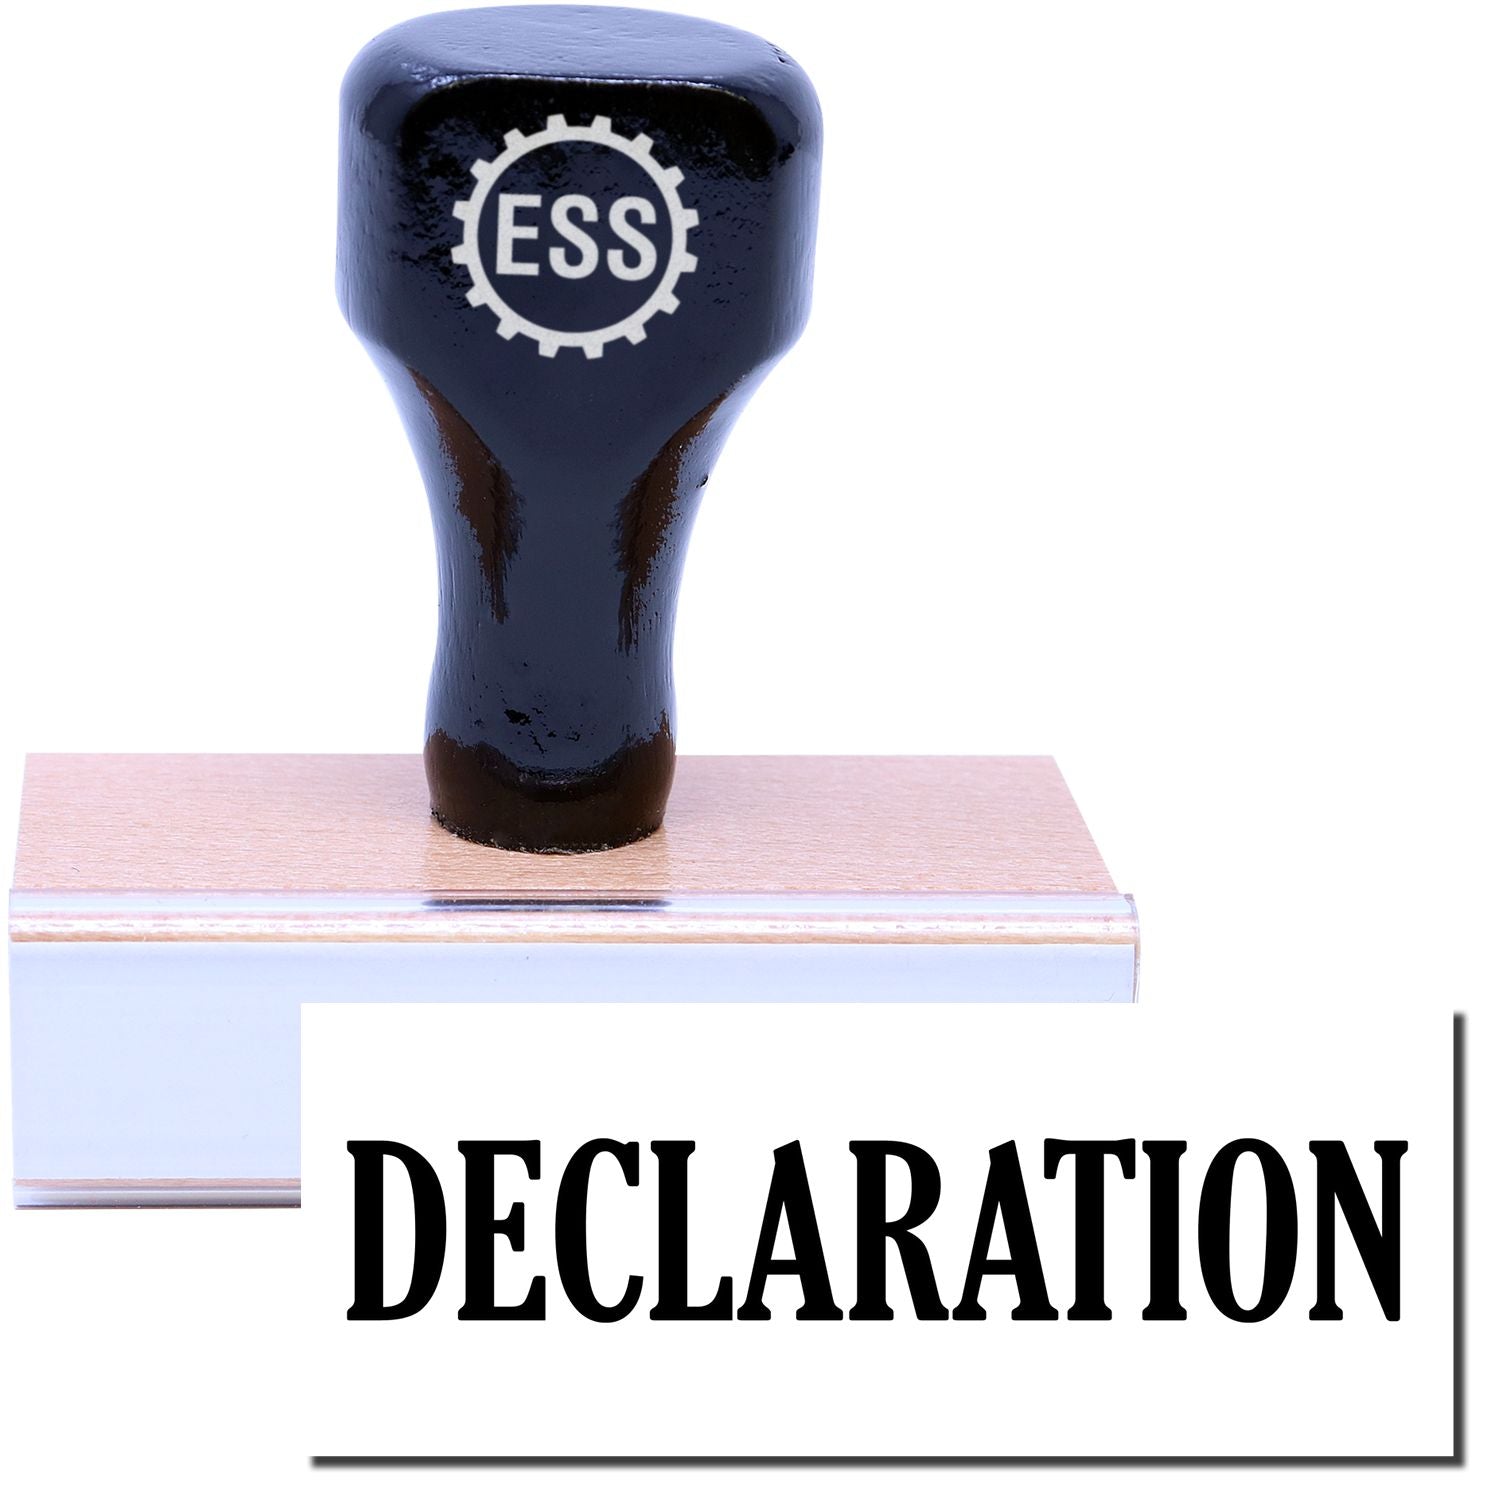 A stock office rubber stamp with a stamped image showing how the text "DECLARATION" is displayed after stamping.